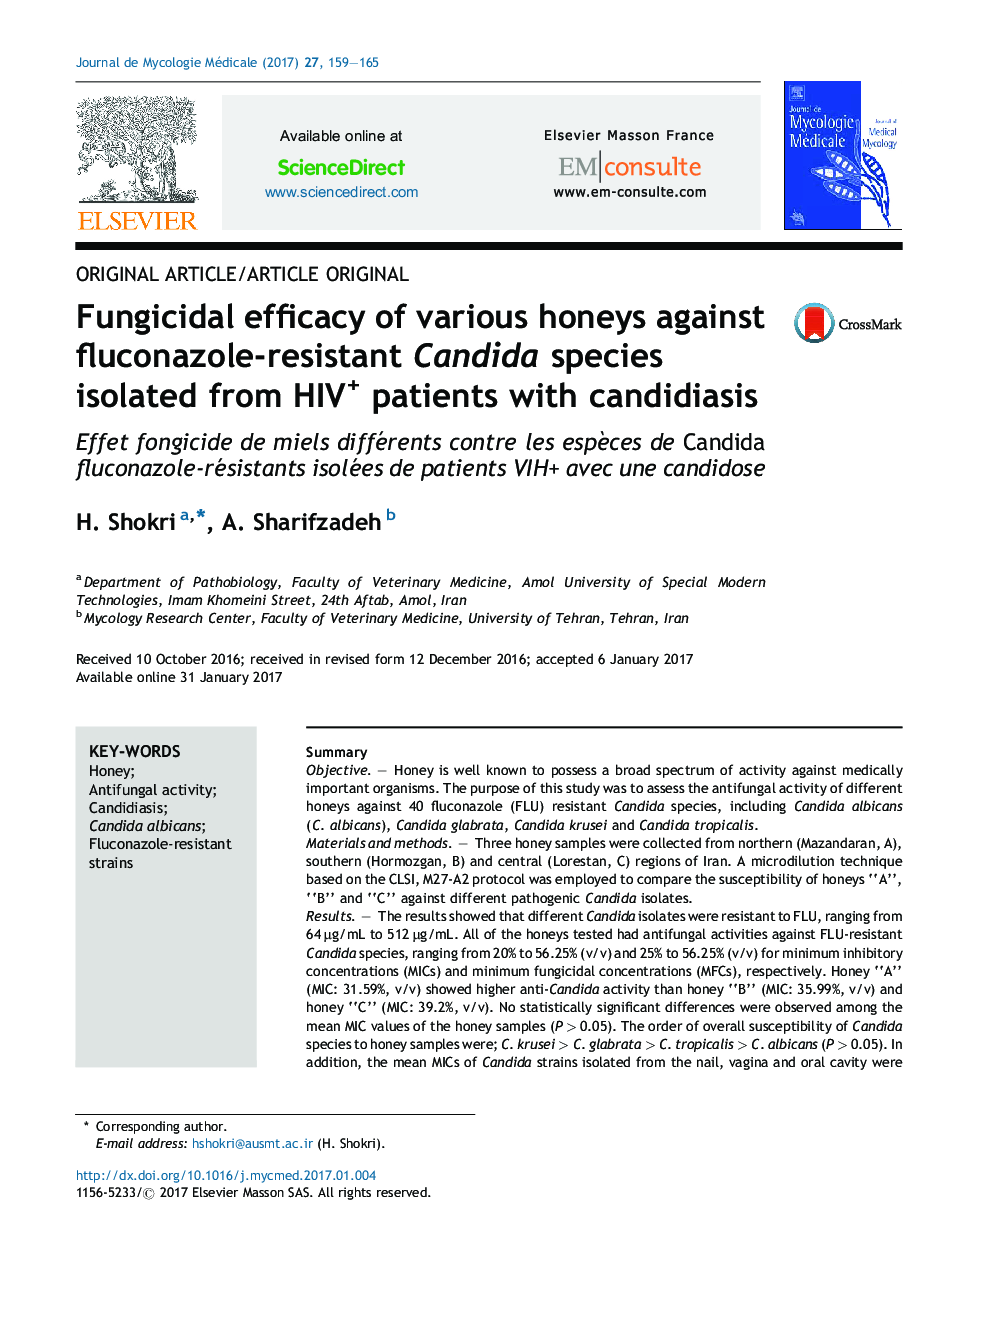 Fungicidal efficacy of various honeys against fluconazole-resistant Candida species isolated from HIV+ patients with candidiasis